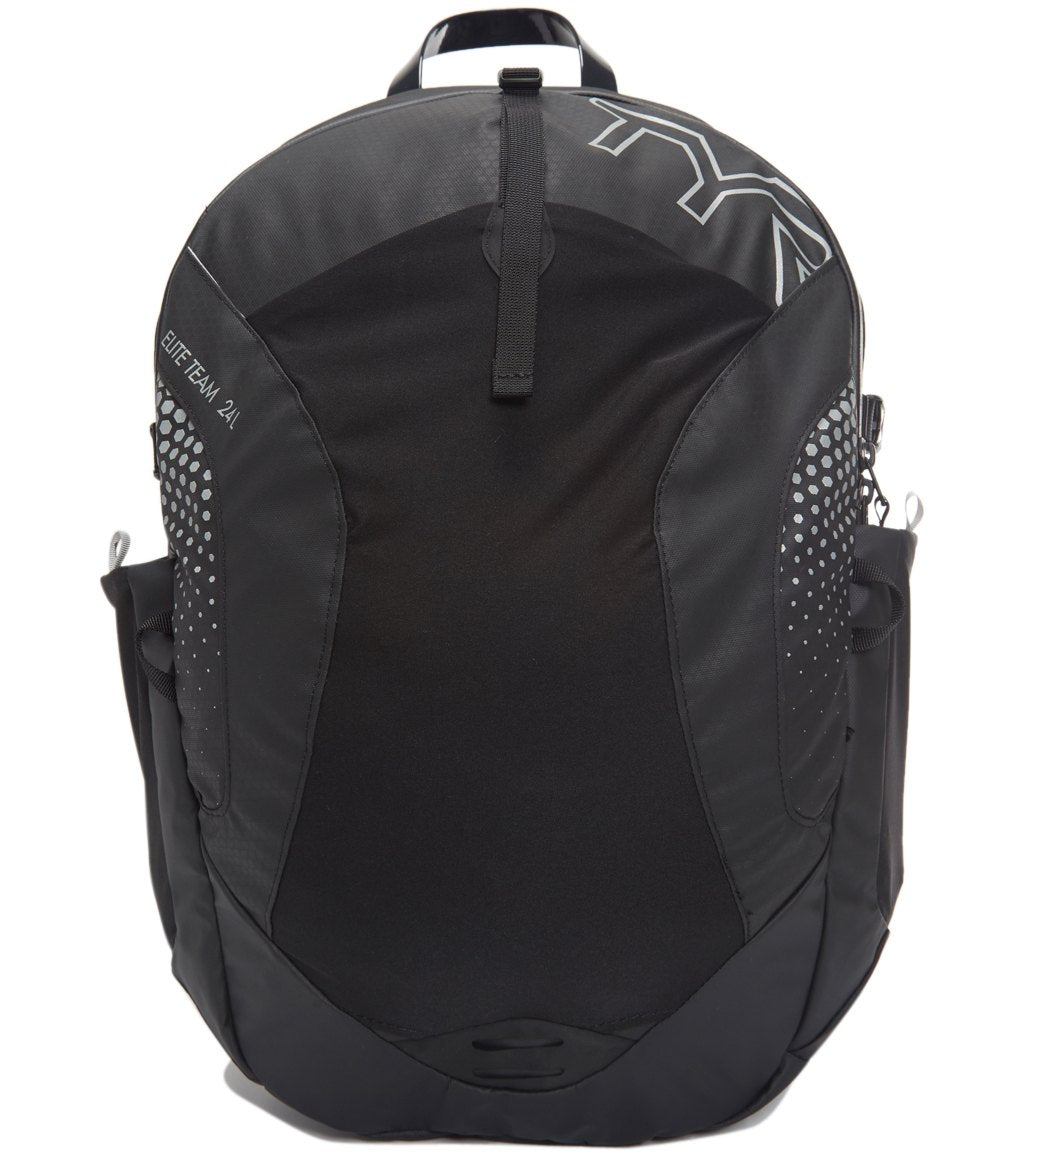 TYR Elite Team Backpack at SwimOutlet.com